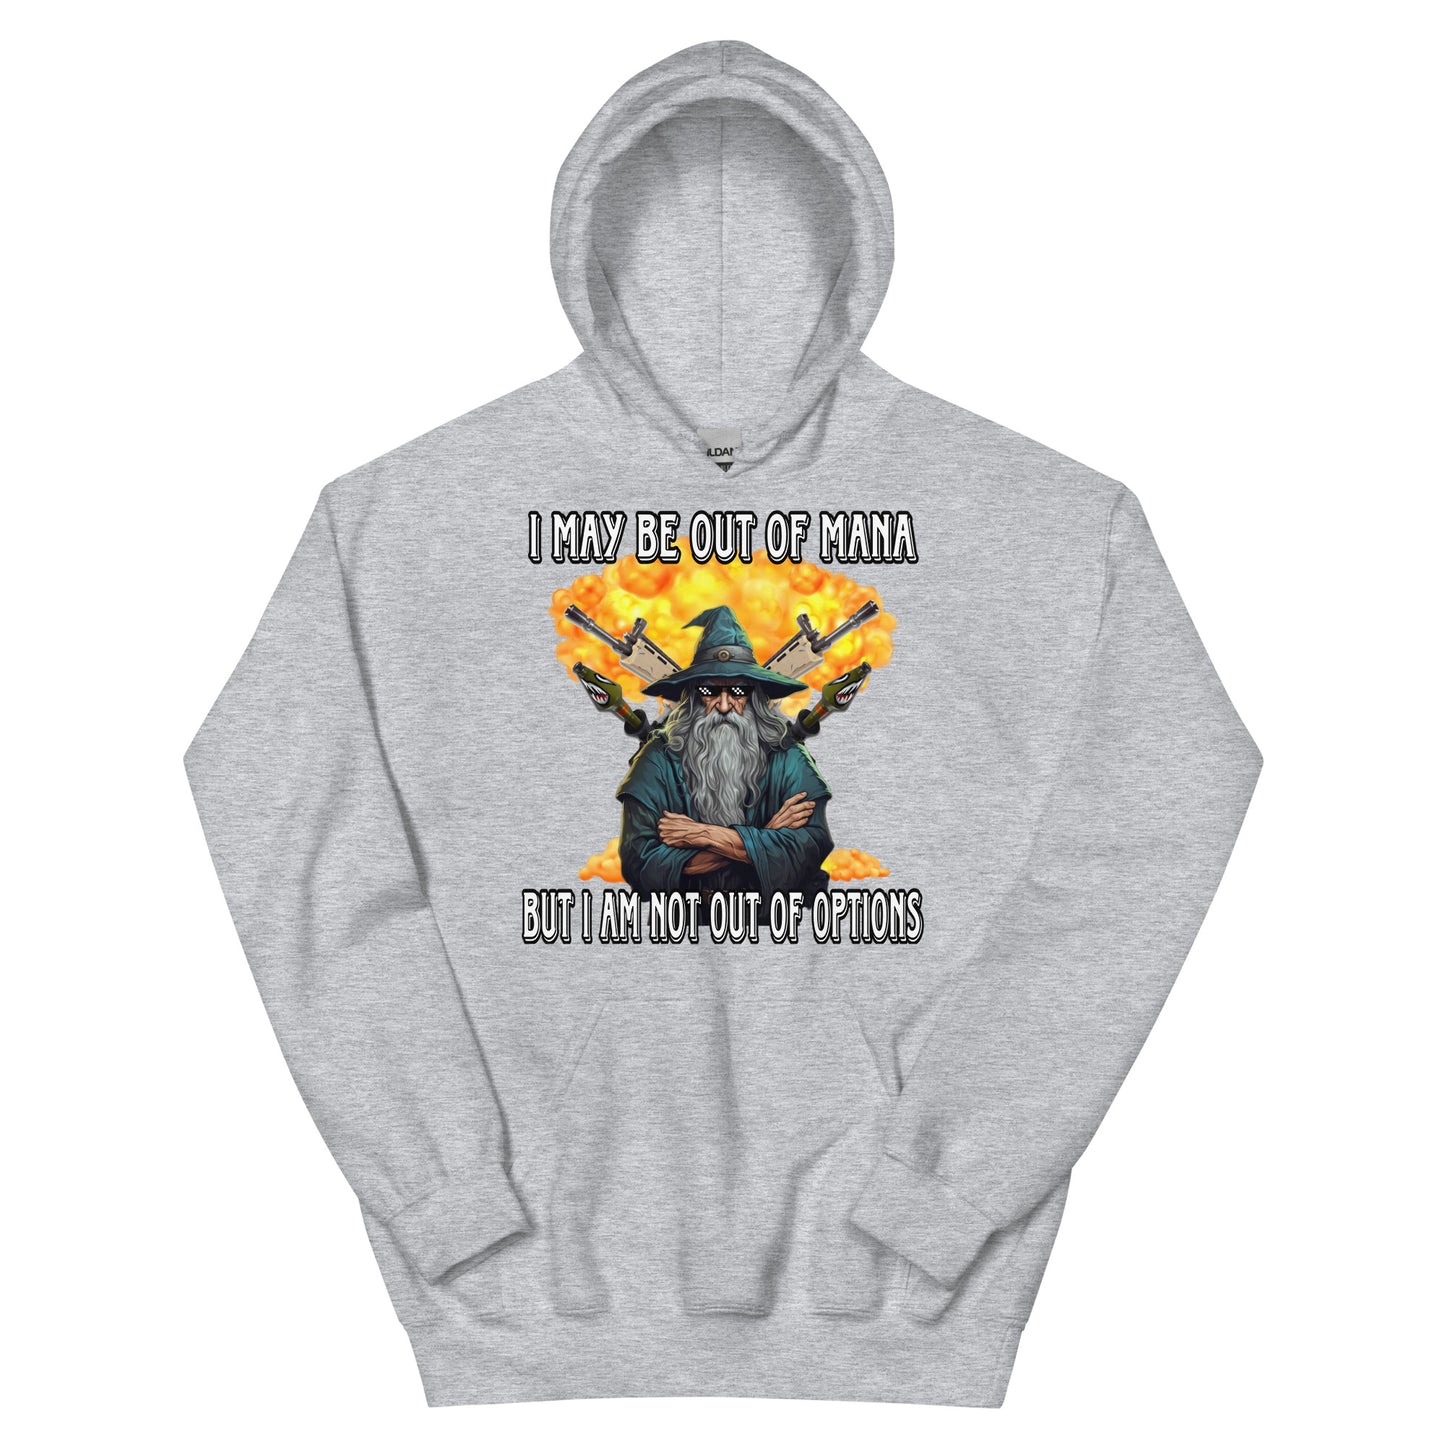 I may be out of mana but I am not out of options Hoodie